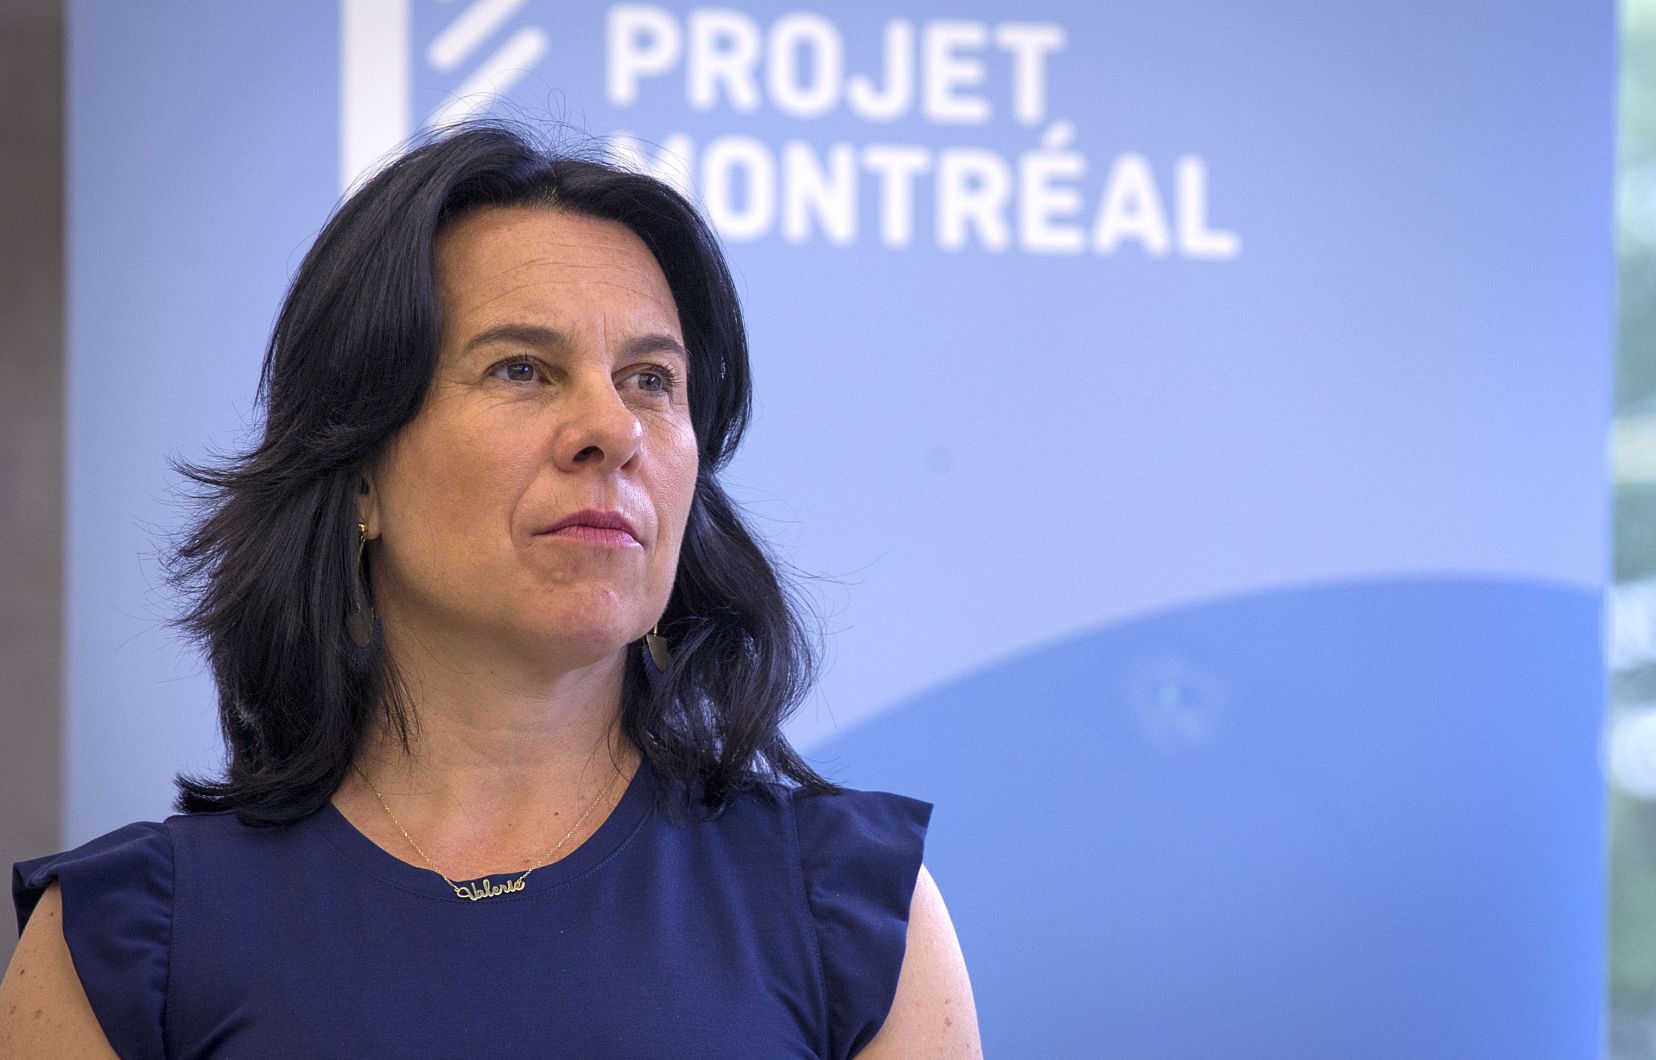 PROJET MONTREAL PROPOSES LANDLORD CERTIFICATION TO PROTECT TENANTS FROM RENT HIKES, RENOVICTIONS